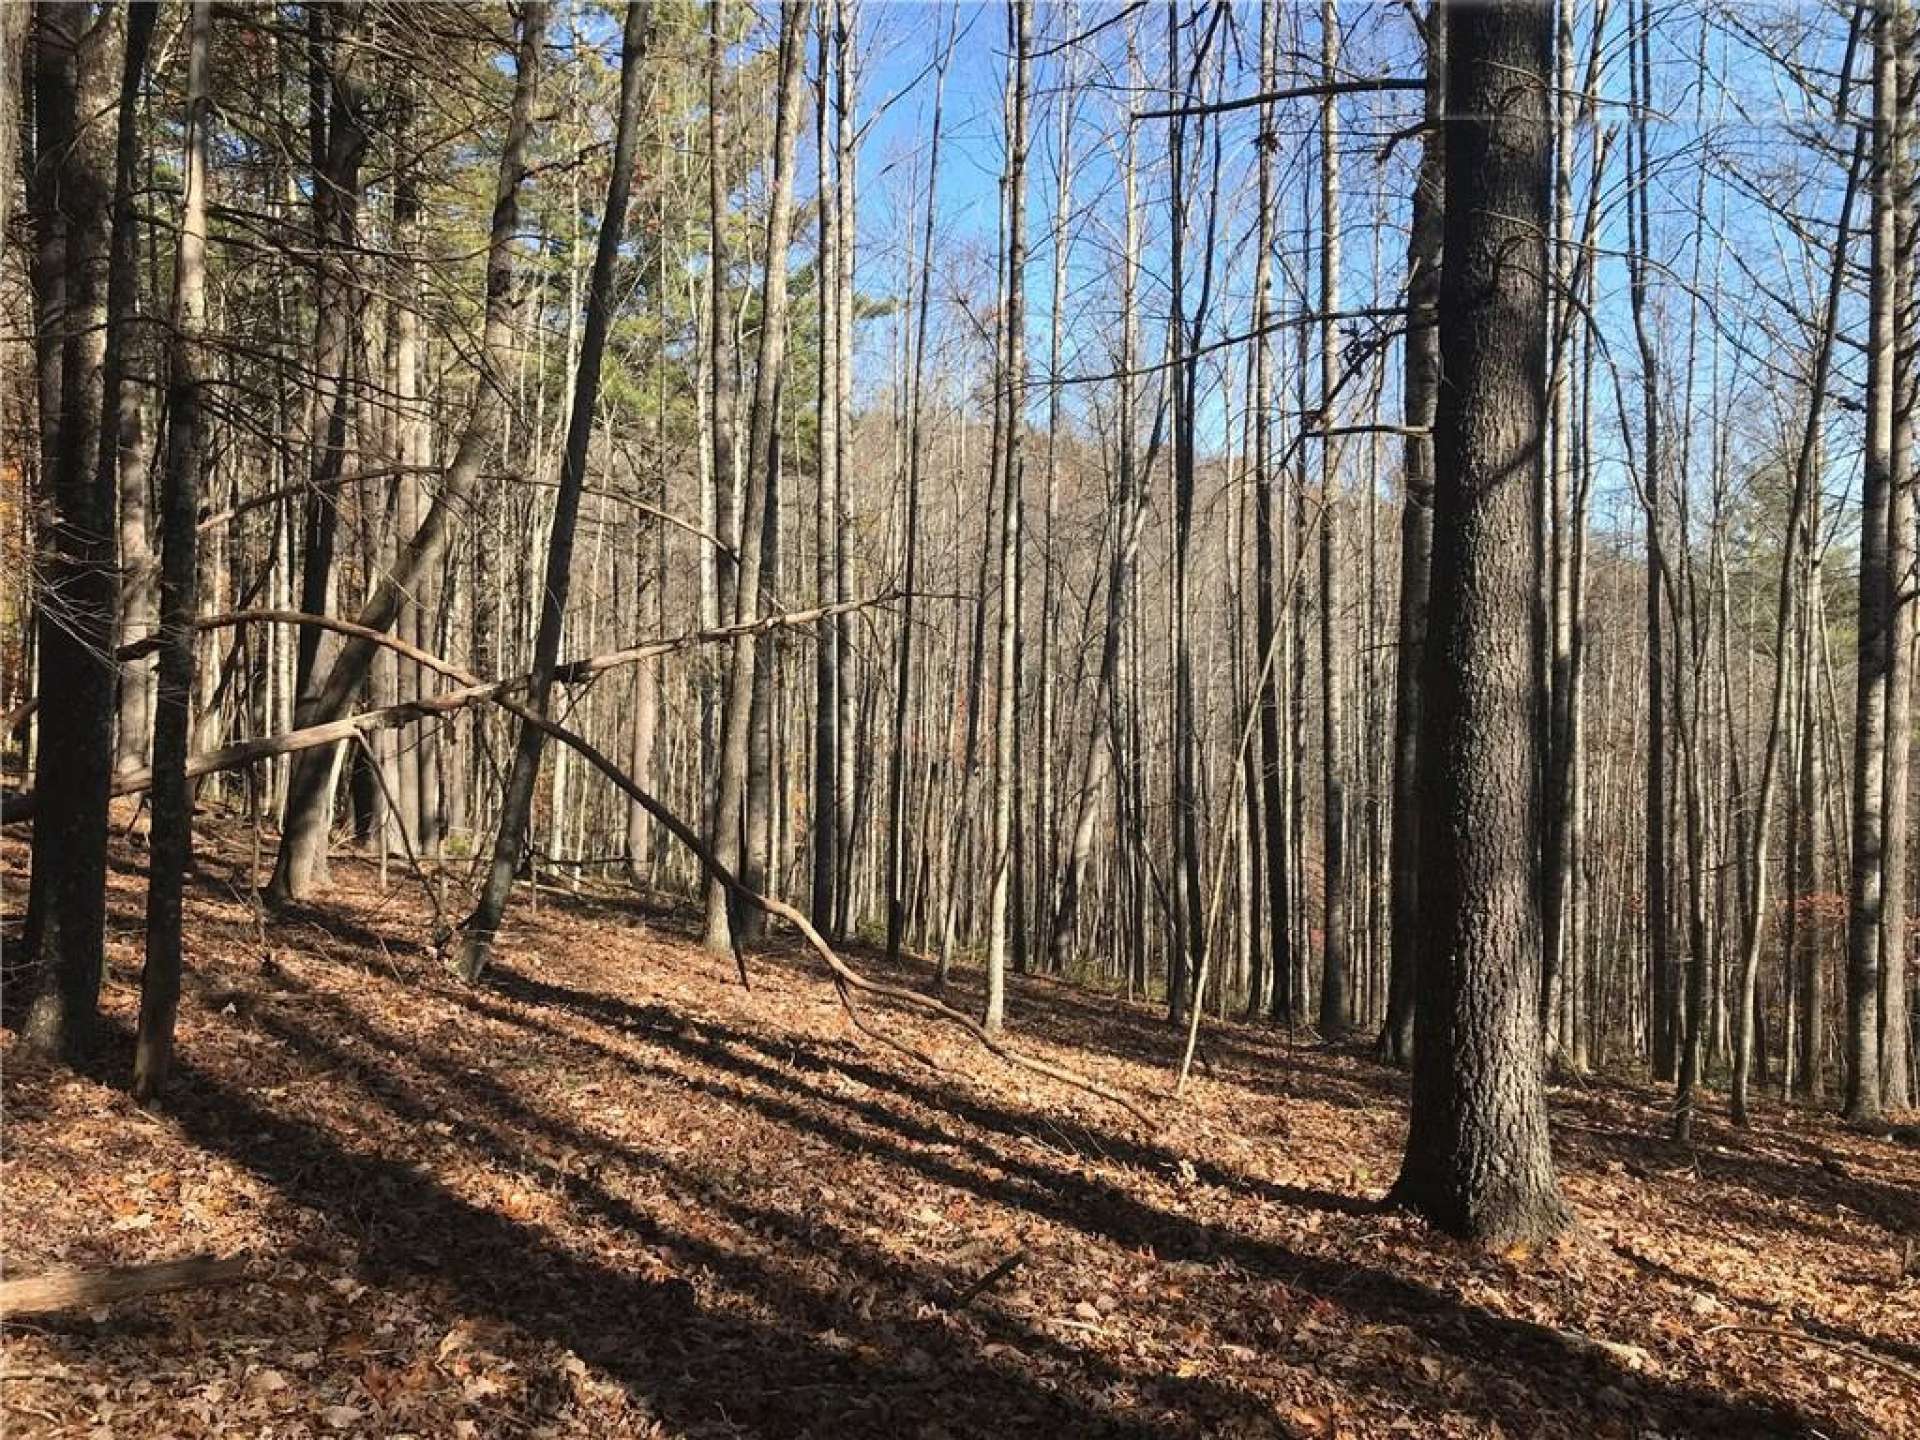 Offered at $232,000, this wonderfully forested 58+ acre land tract is an ideal choice for development, investment, hunting tract, or your private NC Mountain estate.  Call today for more information on listing V220